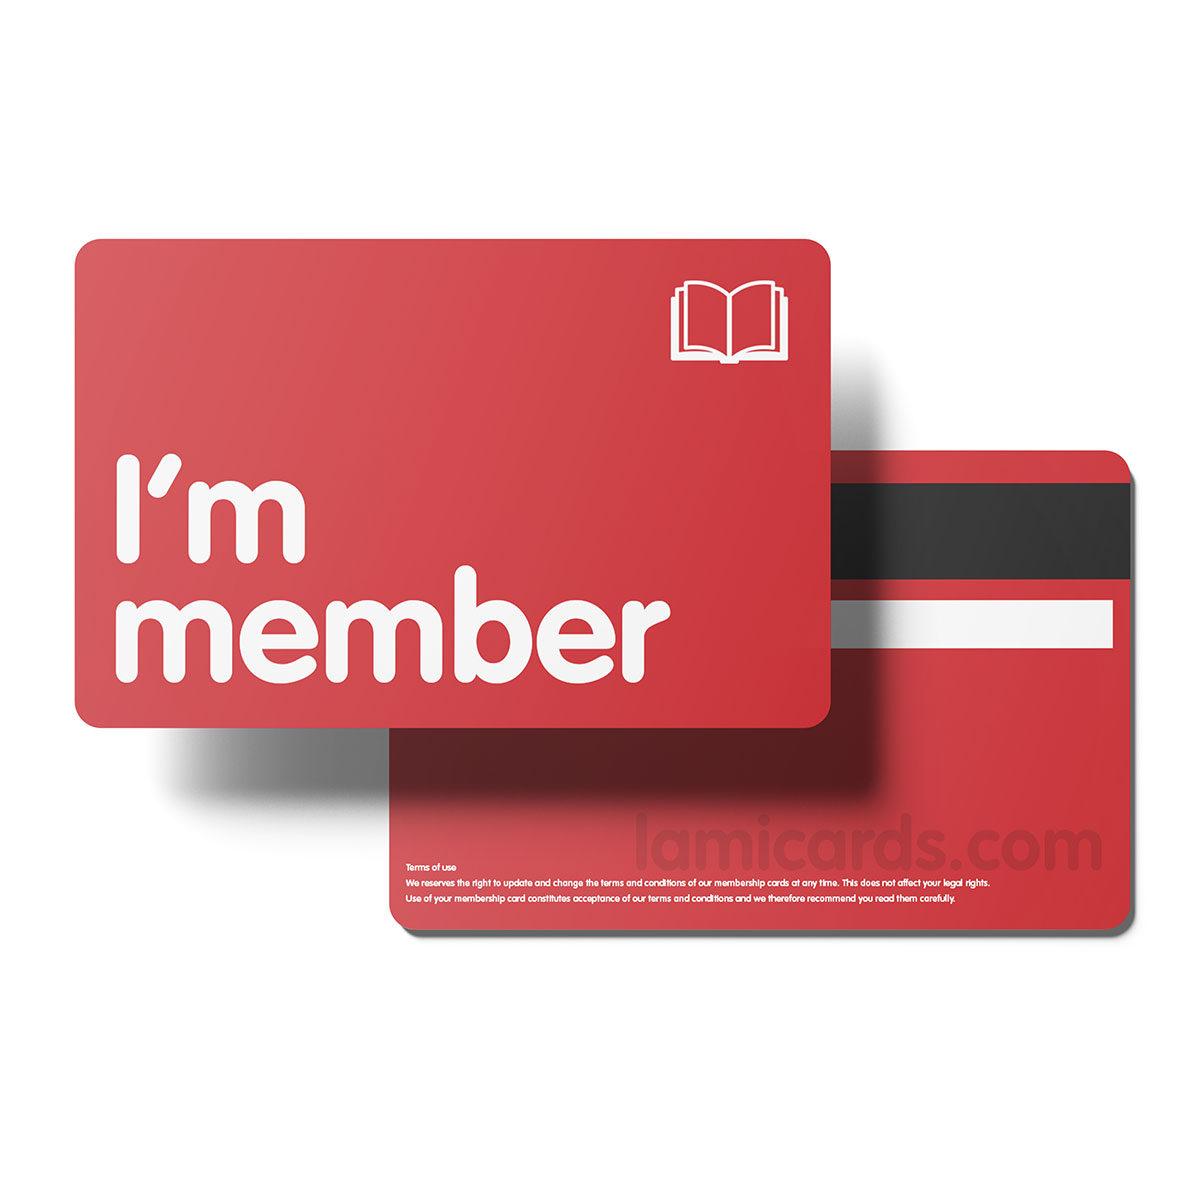 book-shop-membership-cards-with-magnetic-strip-and-signature-panel